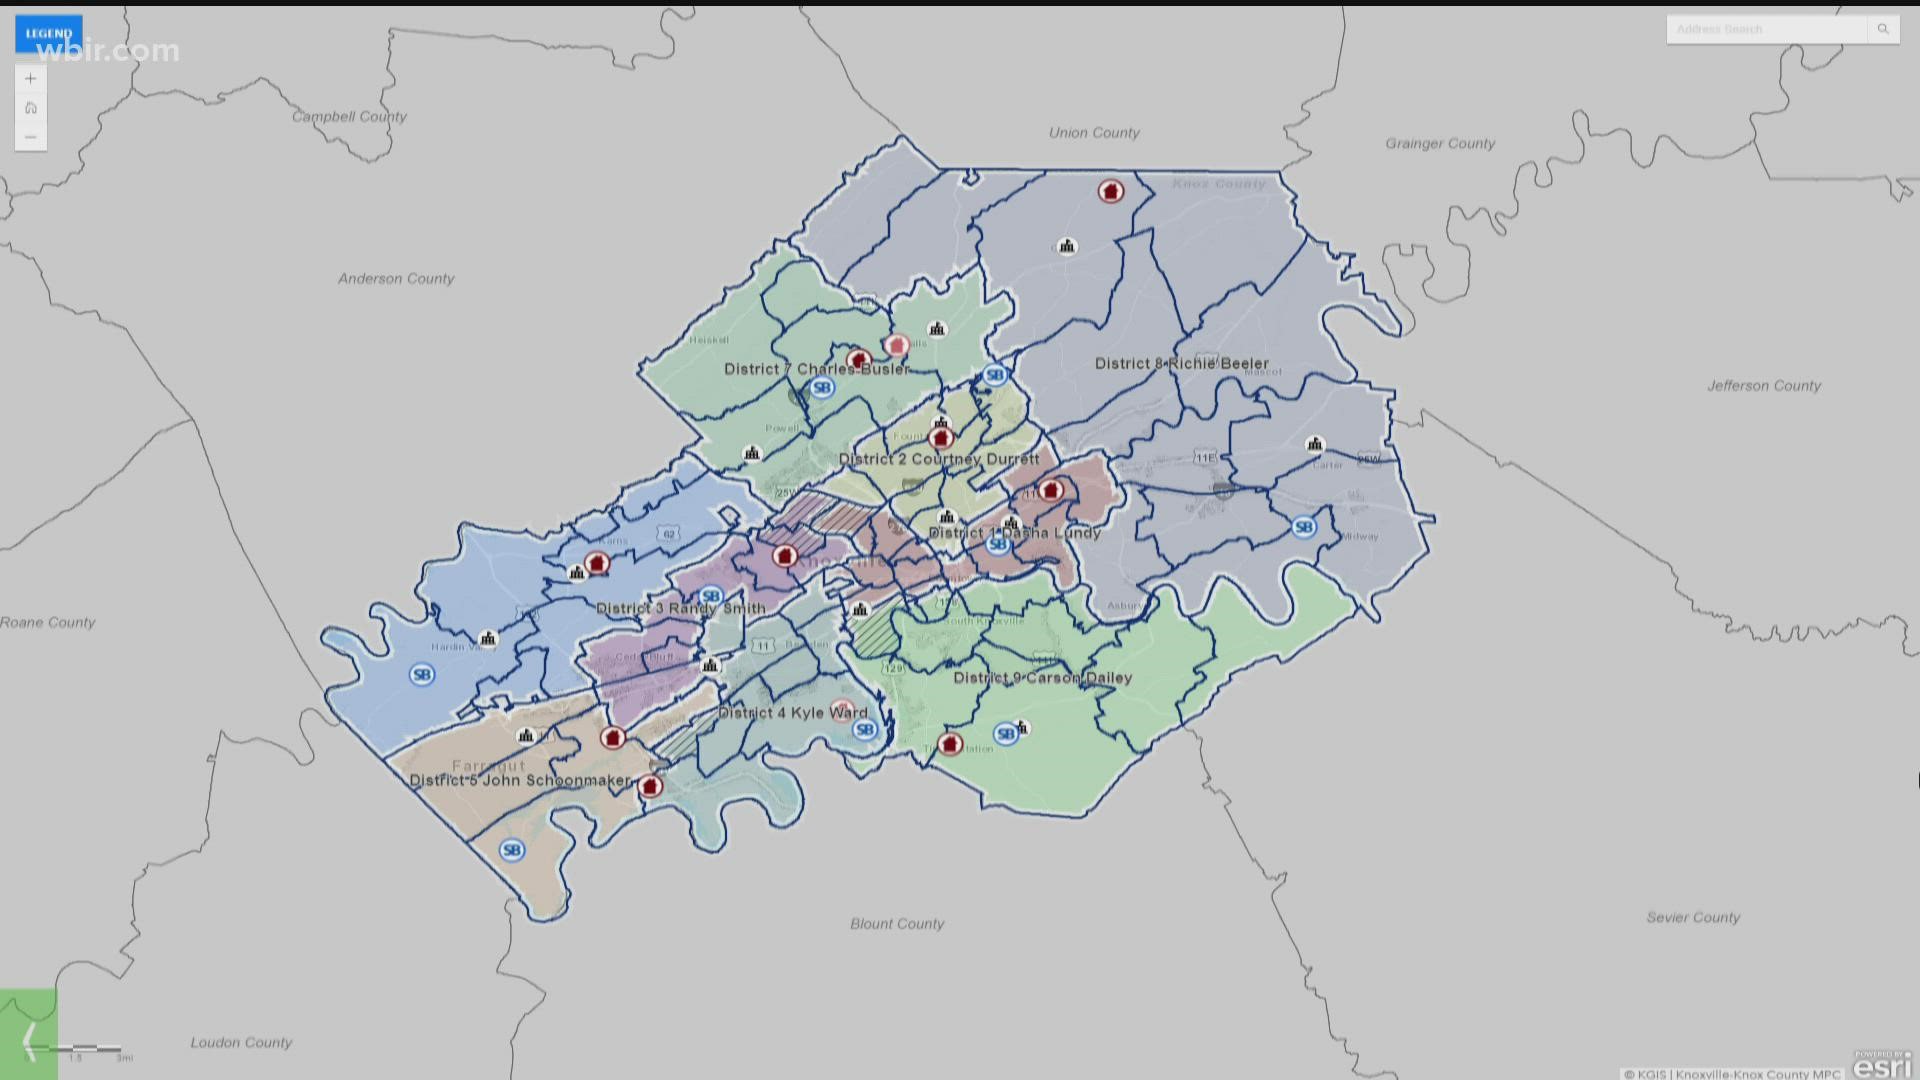 On Thursday, the Knox County Commission adopted Map 3B which left a majority-minority district intact but also drew controversy from the community.